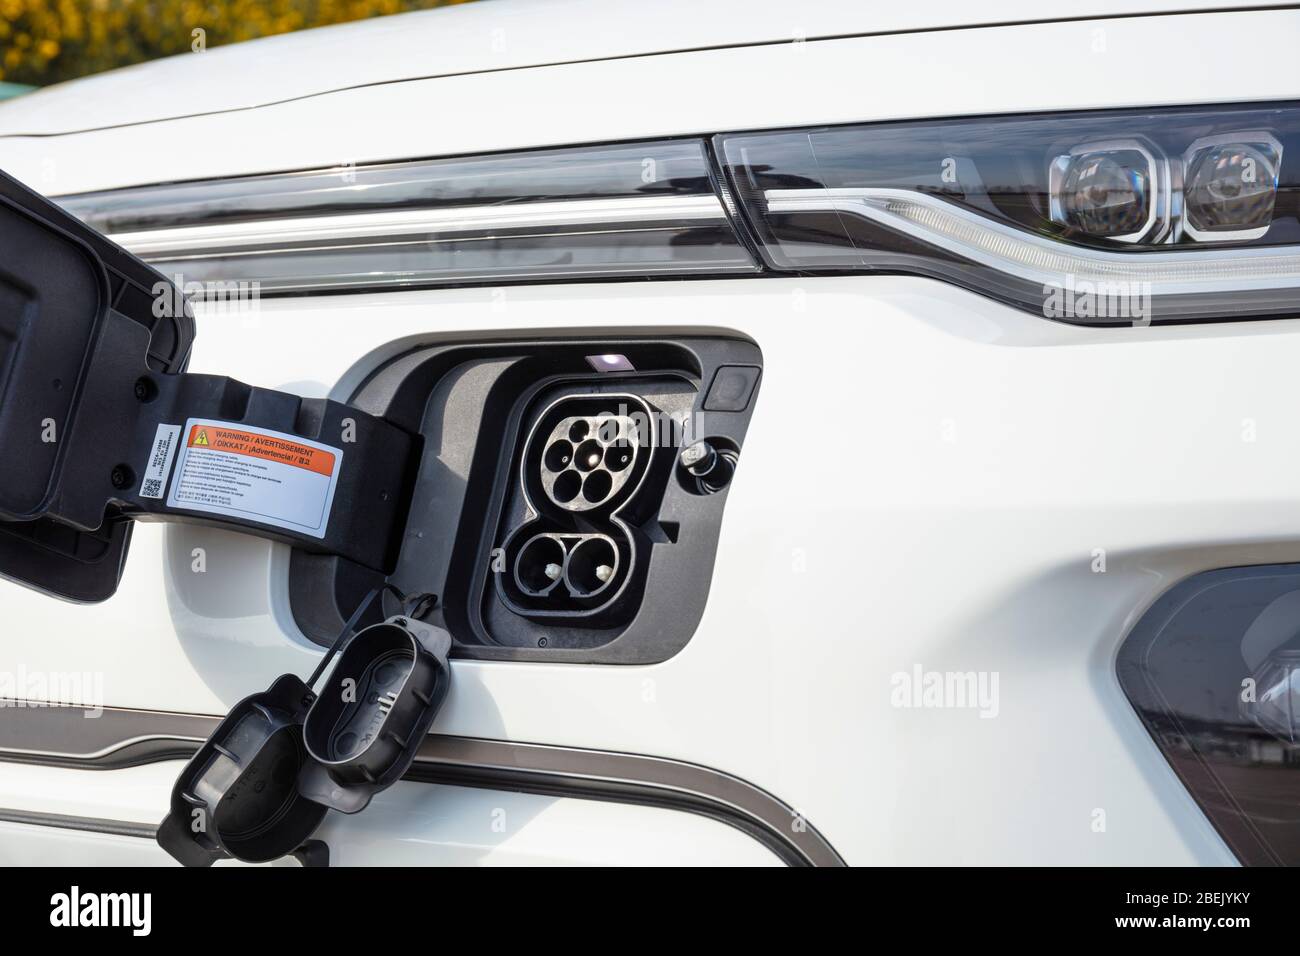 New electric car Kia E Soul march 2020 electric car charging port CCS charging port on the front of the car with front flap open for charging uk Stock Photo